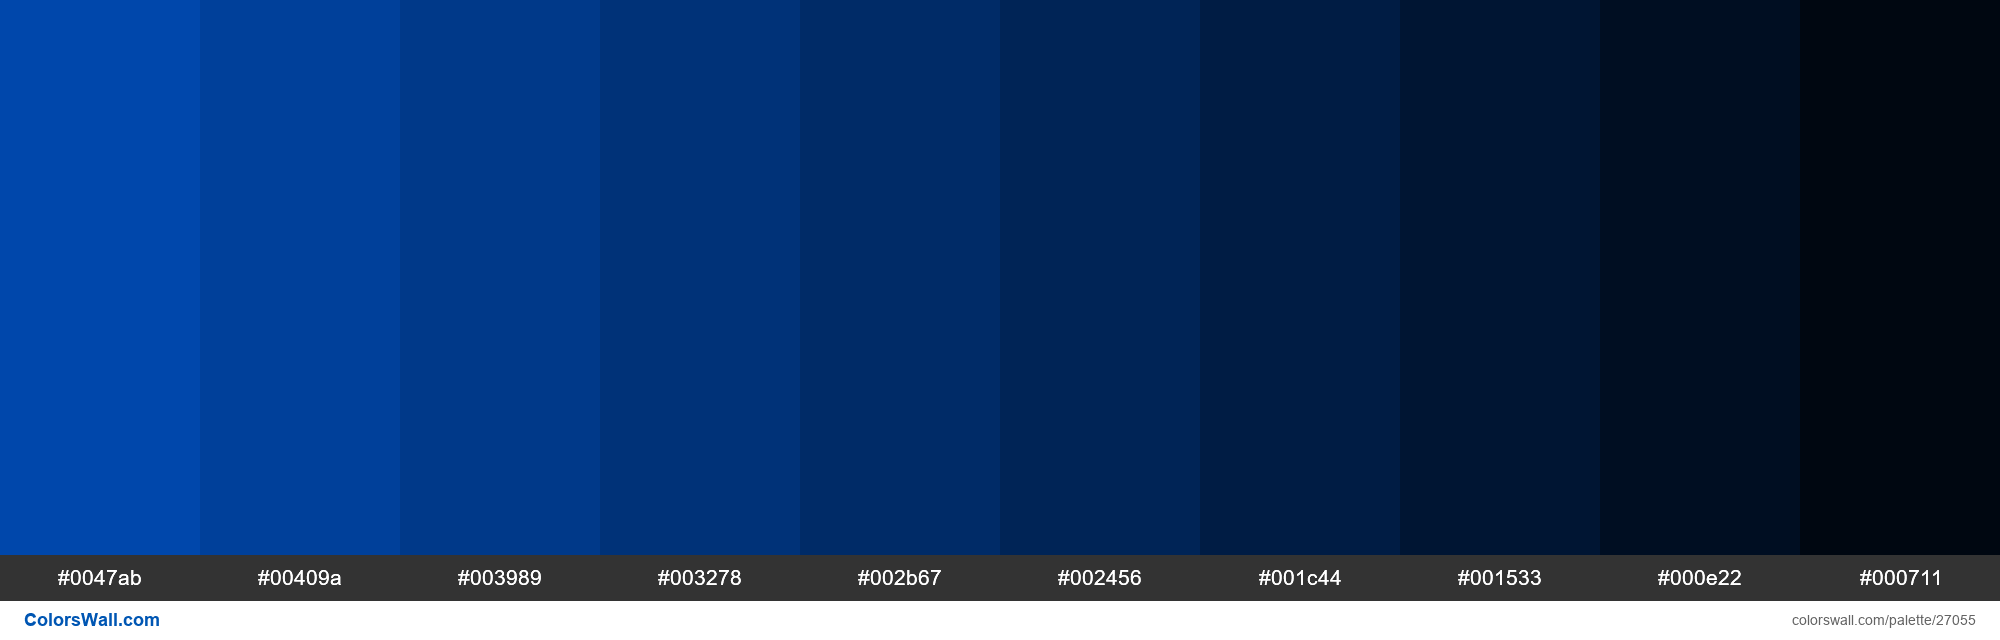 Shades of Cobalt color #0047AB hex - ColorsWall